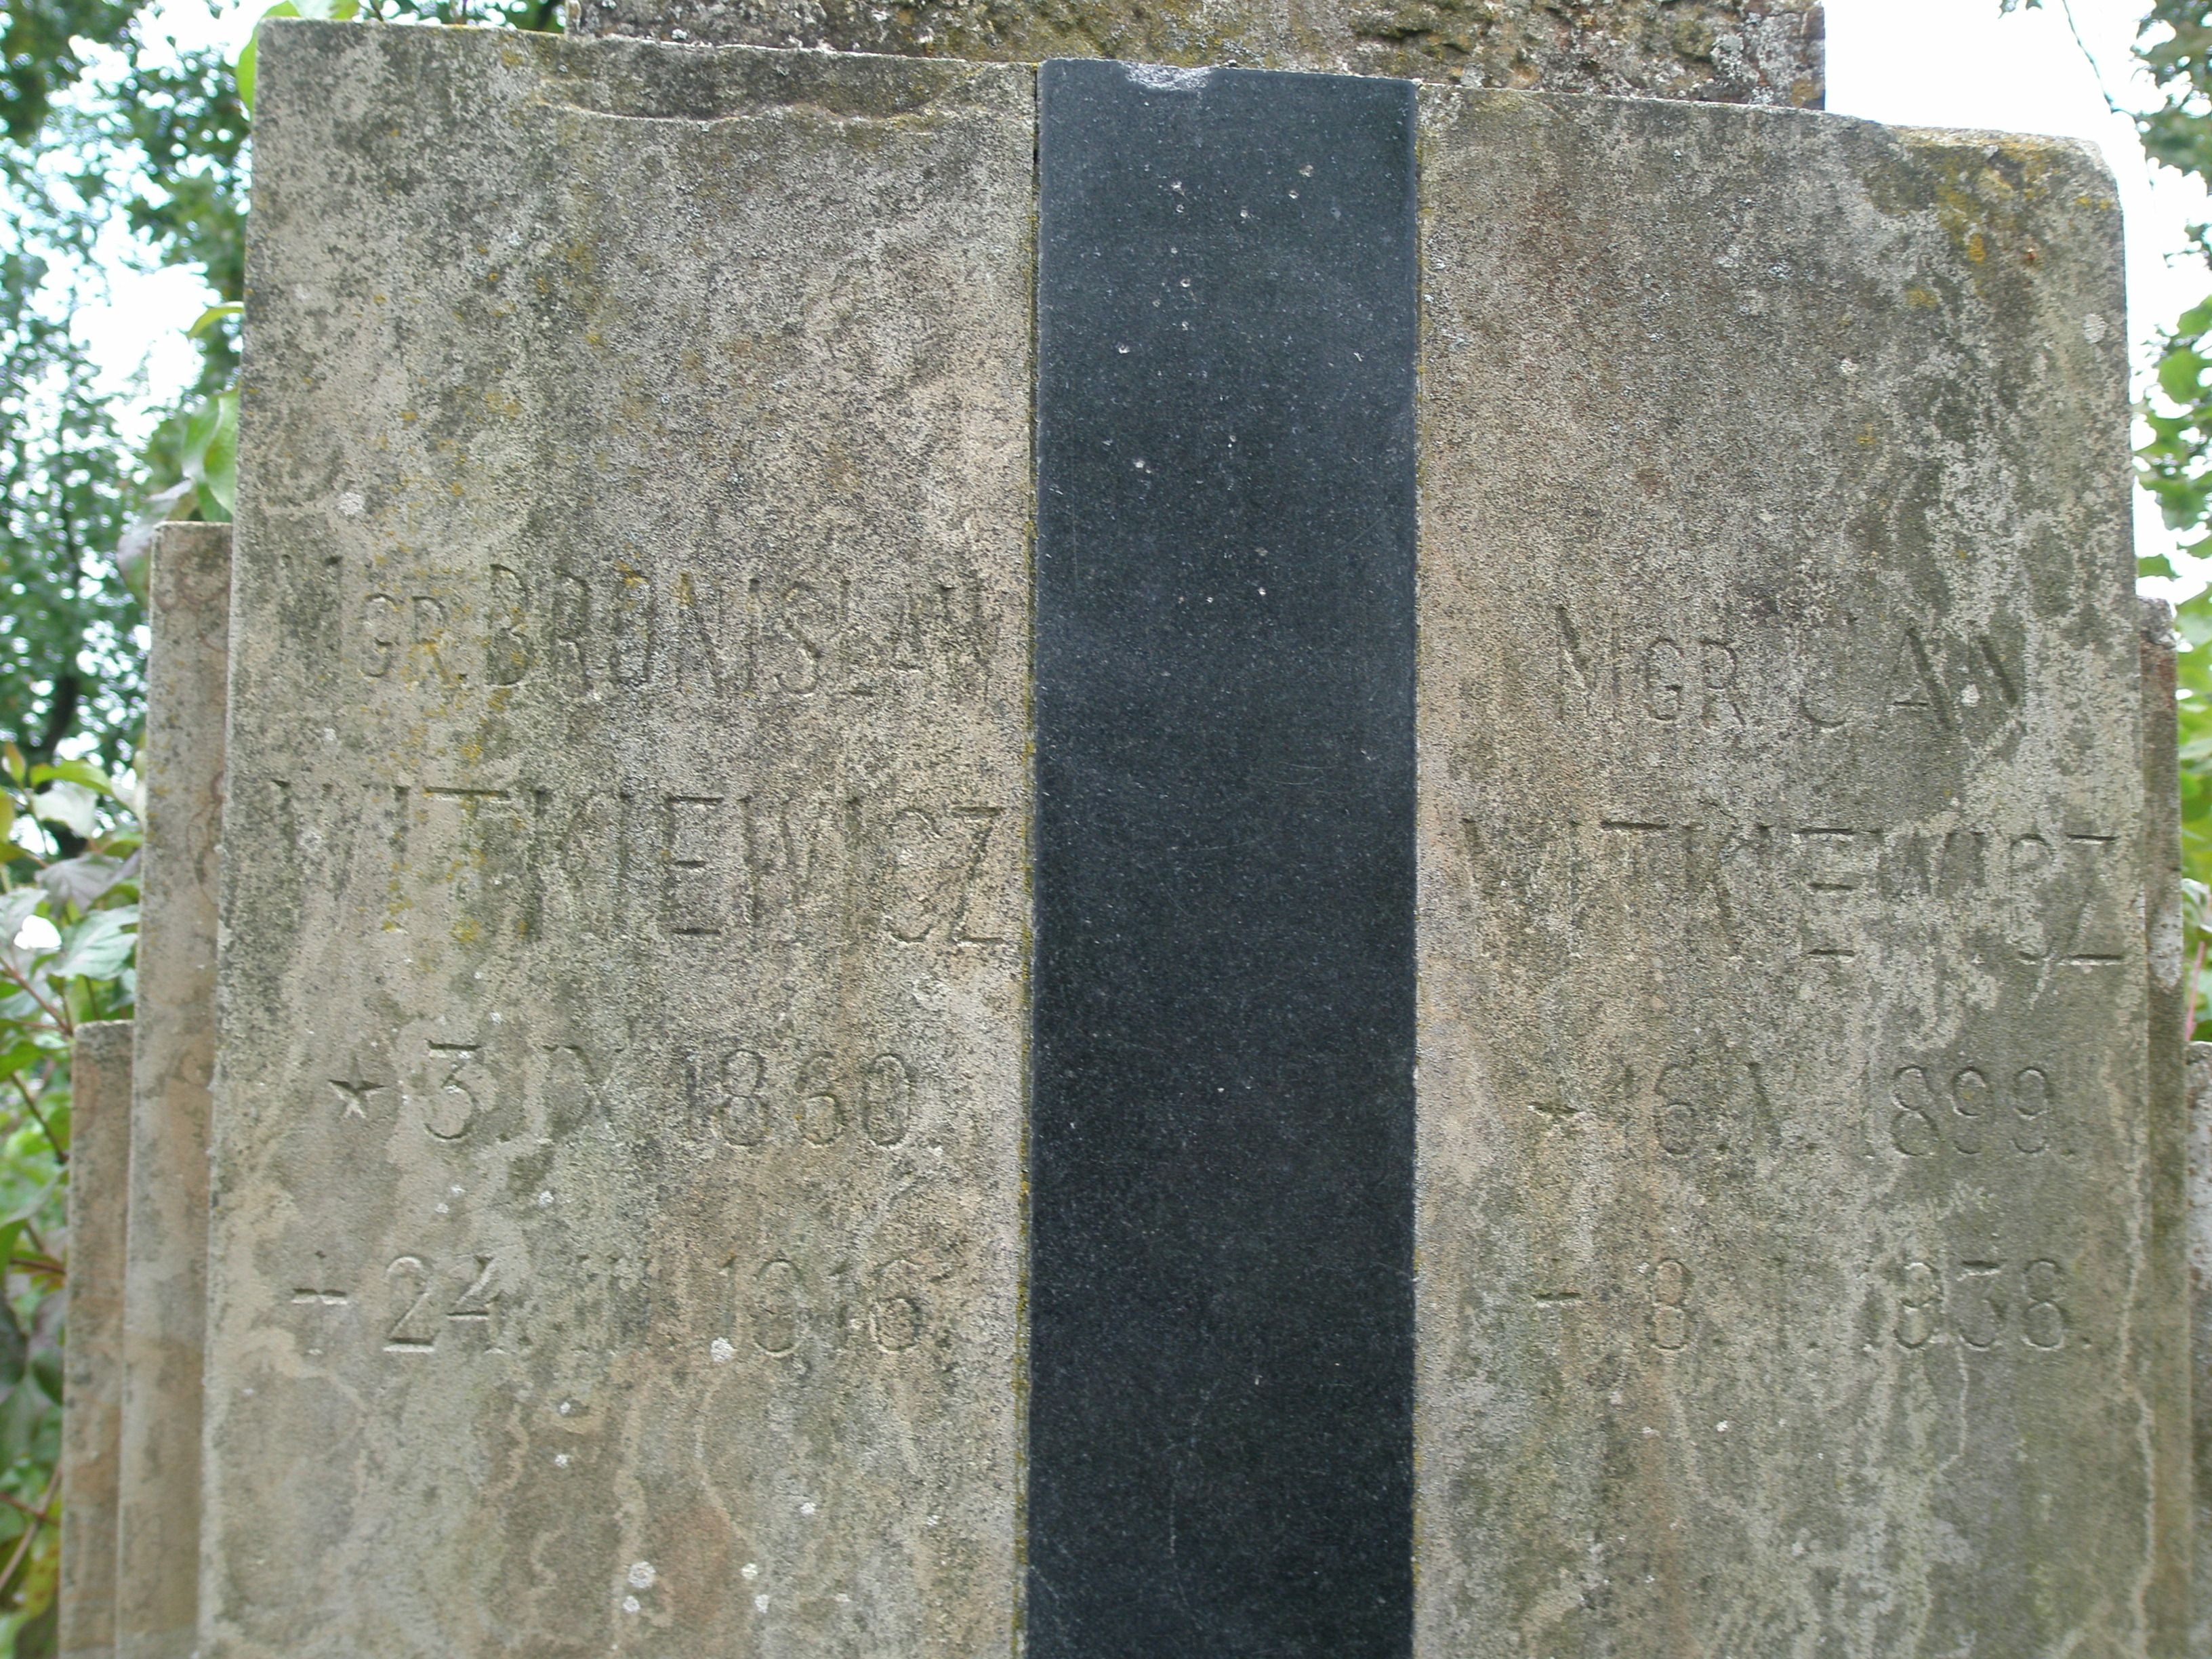 Inscription from the gravestone of Bronislaw and Jan Witkiewicz, as of 2006